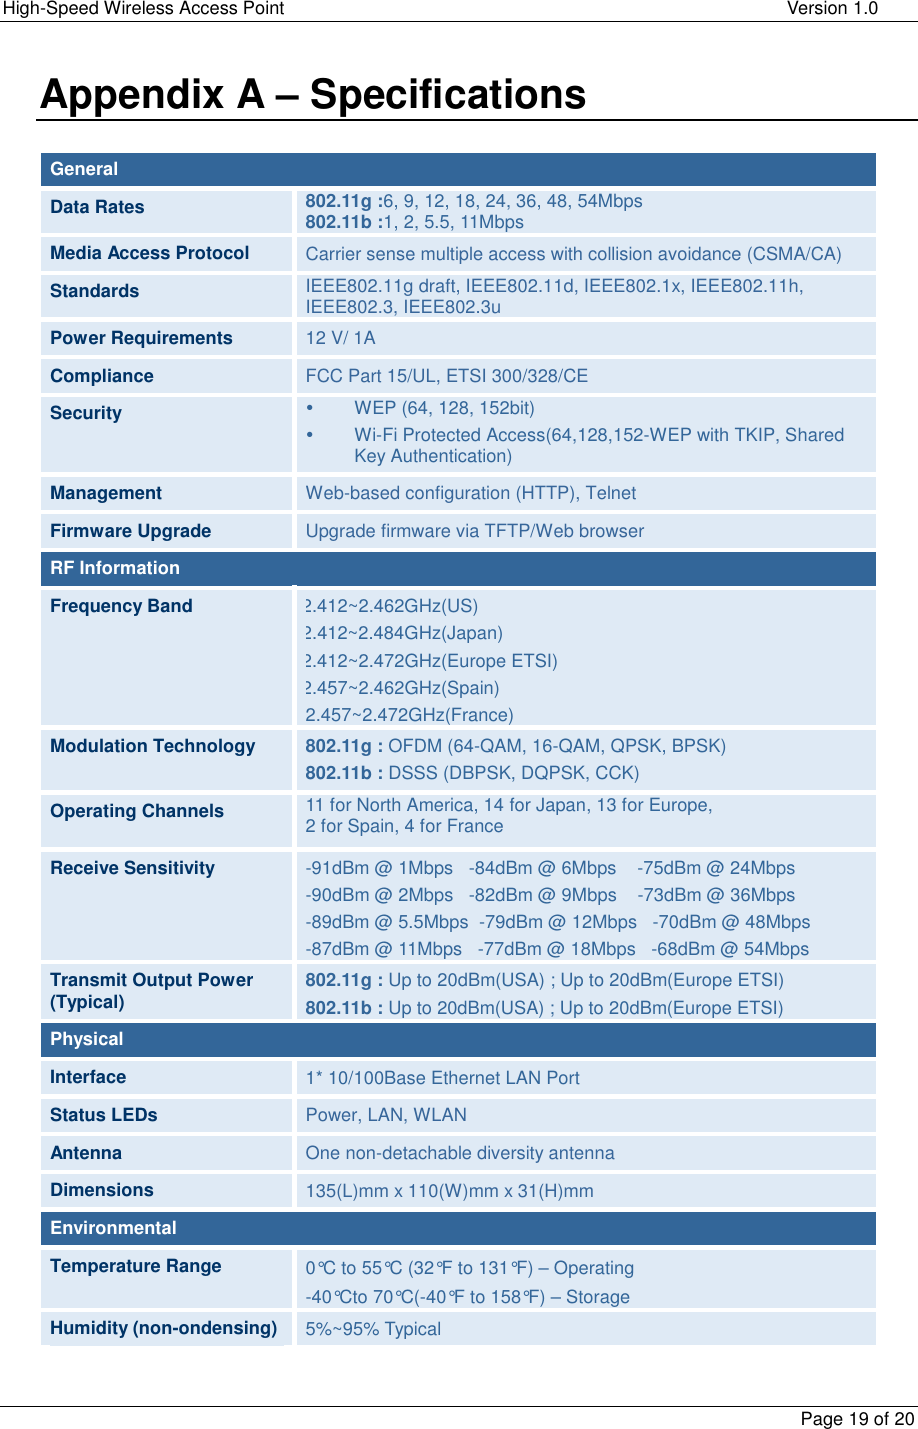 High-Speed Wireless Access Point    Version 1.0  Page 19 of 20  Appendix A – Specifications  General Data Rates  802.11g :6, 9, 12, 18, 24, 36, 48, 54Mbps 802.11b :1, 2, 5.5, 11Mbps Media Access Protocol  Carrier sense multiple access with collision avoidance (CSMA/CA) Standards  IEEE802.11g draft, IEEE802.11d, IEEE802.1x, IEEE802.11h, IEEE802.3, IEEE802.3u Power Requirements  12 V/ 1A Compliance  FCC Part 15/UL, ETSI 300/328/CE Security   y WEP (64, 128, 152bit) y Wi-Fi Protected Access(64,128,152-WEP with TKIP, Shared Key Authentication) Management  Web-based configuration (HTTP), Telnet Firmware Upgrade  Upgrade firmware via TFTP/Web browser RF Information Frequency Band  2.412~2.462GHz(US) 2.412~2.484GHz(Japan) 2.412~2.472GHz(Europe ETSI) 2.457~2.462GHz(Spain) 2.457~2.472GHz(France)  Modulation Technology  802.11g : OFDM (64-QAM, 16-QAM, QPSK, BPSK) 802.11b : DSSS (DBPSK, DQPSK, CCK) Operating Channels  11 for North America, 14 for Japan, 13 for Europe,  2 for Spain, 4 for France Receive Sensitivity   -91dBm @ 1Mbps   -84dBm @ 6Mbps    -75dBm @ 24Mbps -90dBm @ 2Mbps   -82dBm @ 9Mbps    -73dBm @ 36Mbps -89dBm @ 5.5Mbps  -79dBm @ 12Mbps   -70dBm @ 48Mbps -87dBm @ 11Mbps   -77dBm @ 18Mbps   -68dBm @ 54Mbps Transmit Output Power (Typical)  802.11g : Up to 20dBm(USA) ; Up to 20dBm(Europe ETSI) 802.11b : Up to 20dBm(USA) ; Up to 20dBm(Europe ETSI) Physical Interface  1* 10/100Base Ethernet LAN Port Status LEDs  Power, LAN, WLAN Antenna  One non-detachable diversity antenna Dimensions  135(L)mm x 110(W)mm x 31(H)mm Environmental Temperature Range  0°C to 55°C (32°F to 131°F) – Operating -40°Cto 70°C(-40°F to 158°F) – Storage Humidity (non-ondensing)  5%~95% Typical  